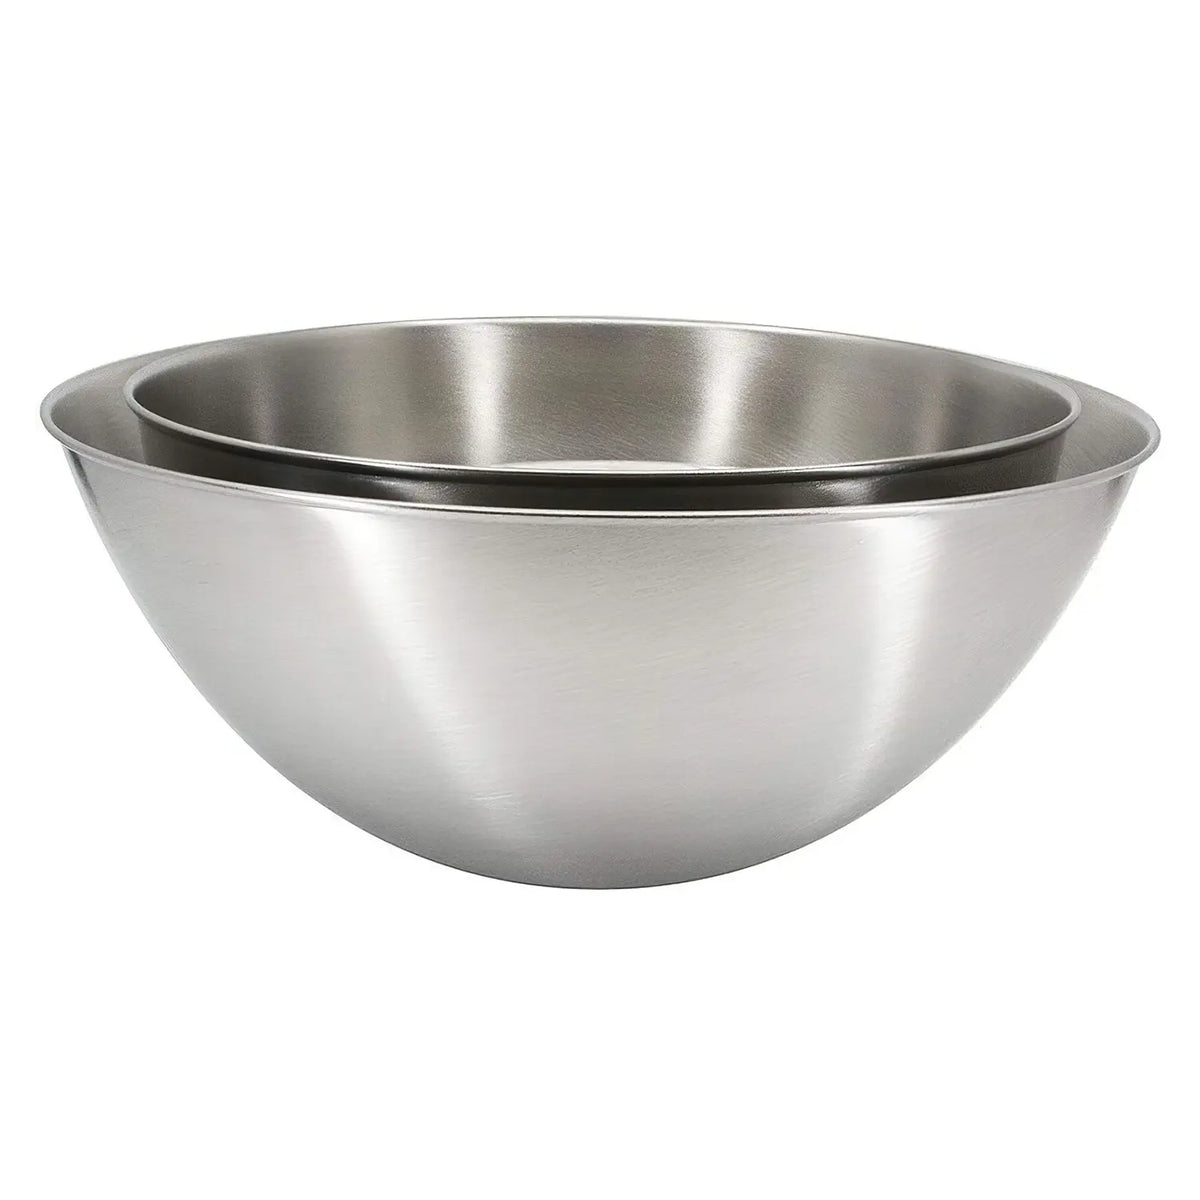 1.2 Qt Stainless Steel Mixing Bowls for Kitchen, Baking, Cooking Prep (5  Piece Set)